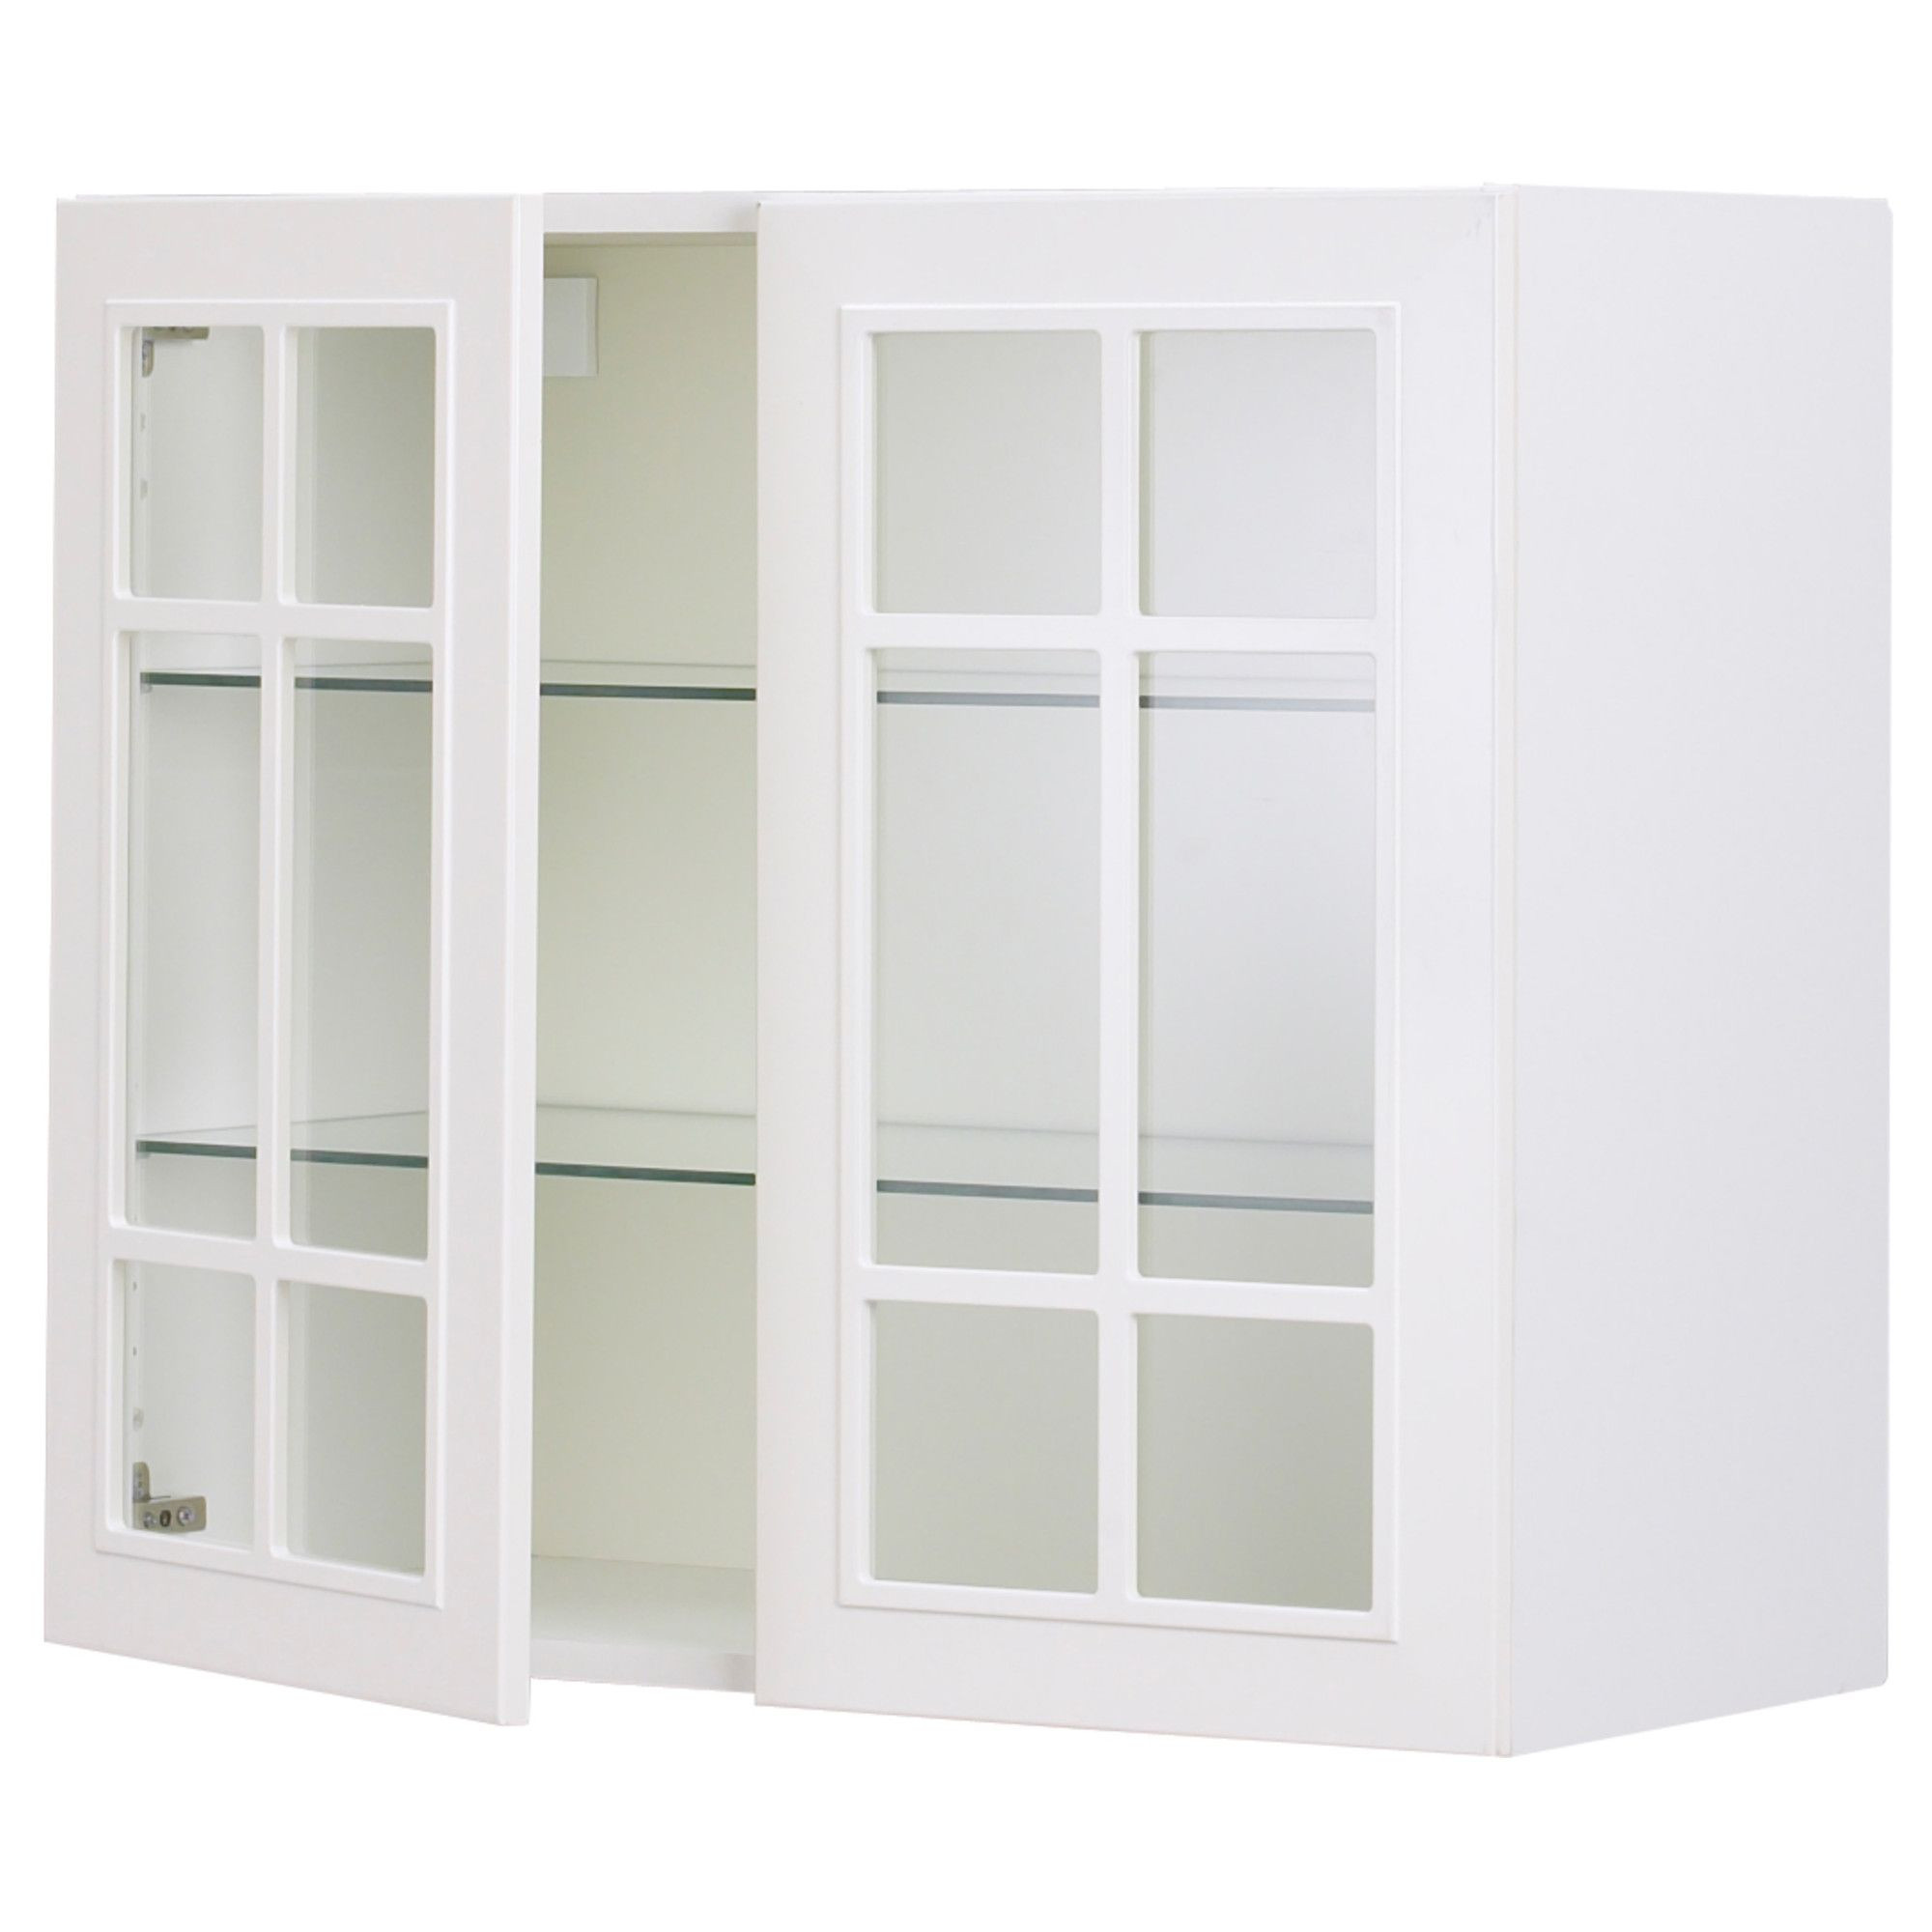 Glass Fronted Kitchen Wall Cabinet Beautiful $215 30 X 30 Glass Front Wall Cabinet Akurum Wall